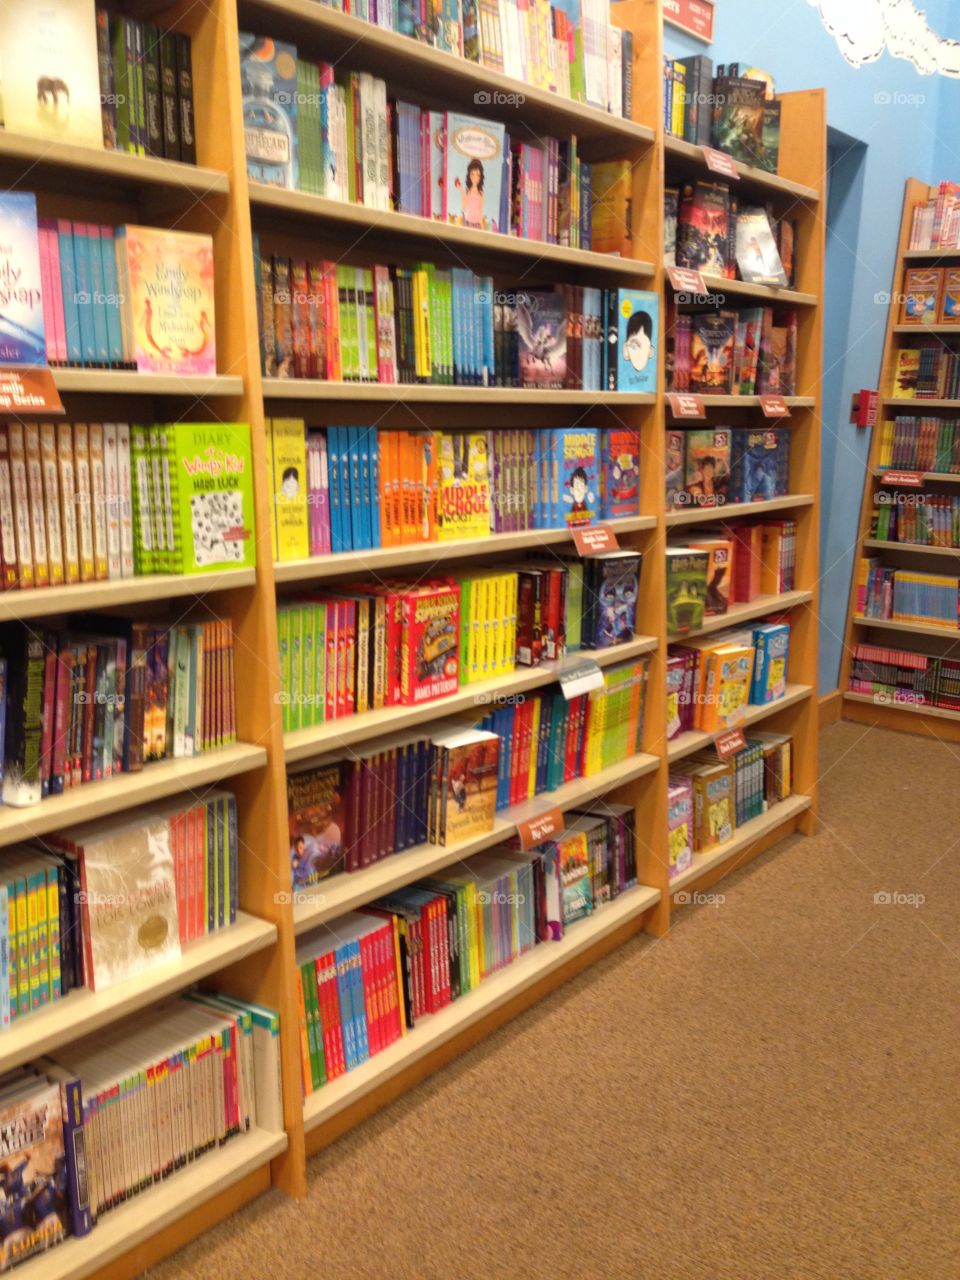 Bookstore shelves. The children's section of our local bookstore.